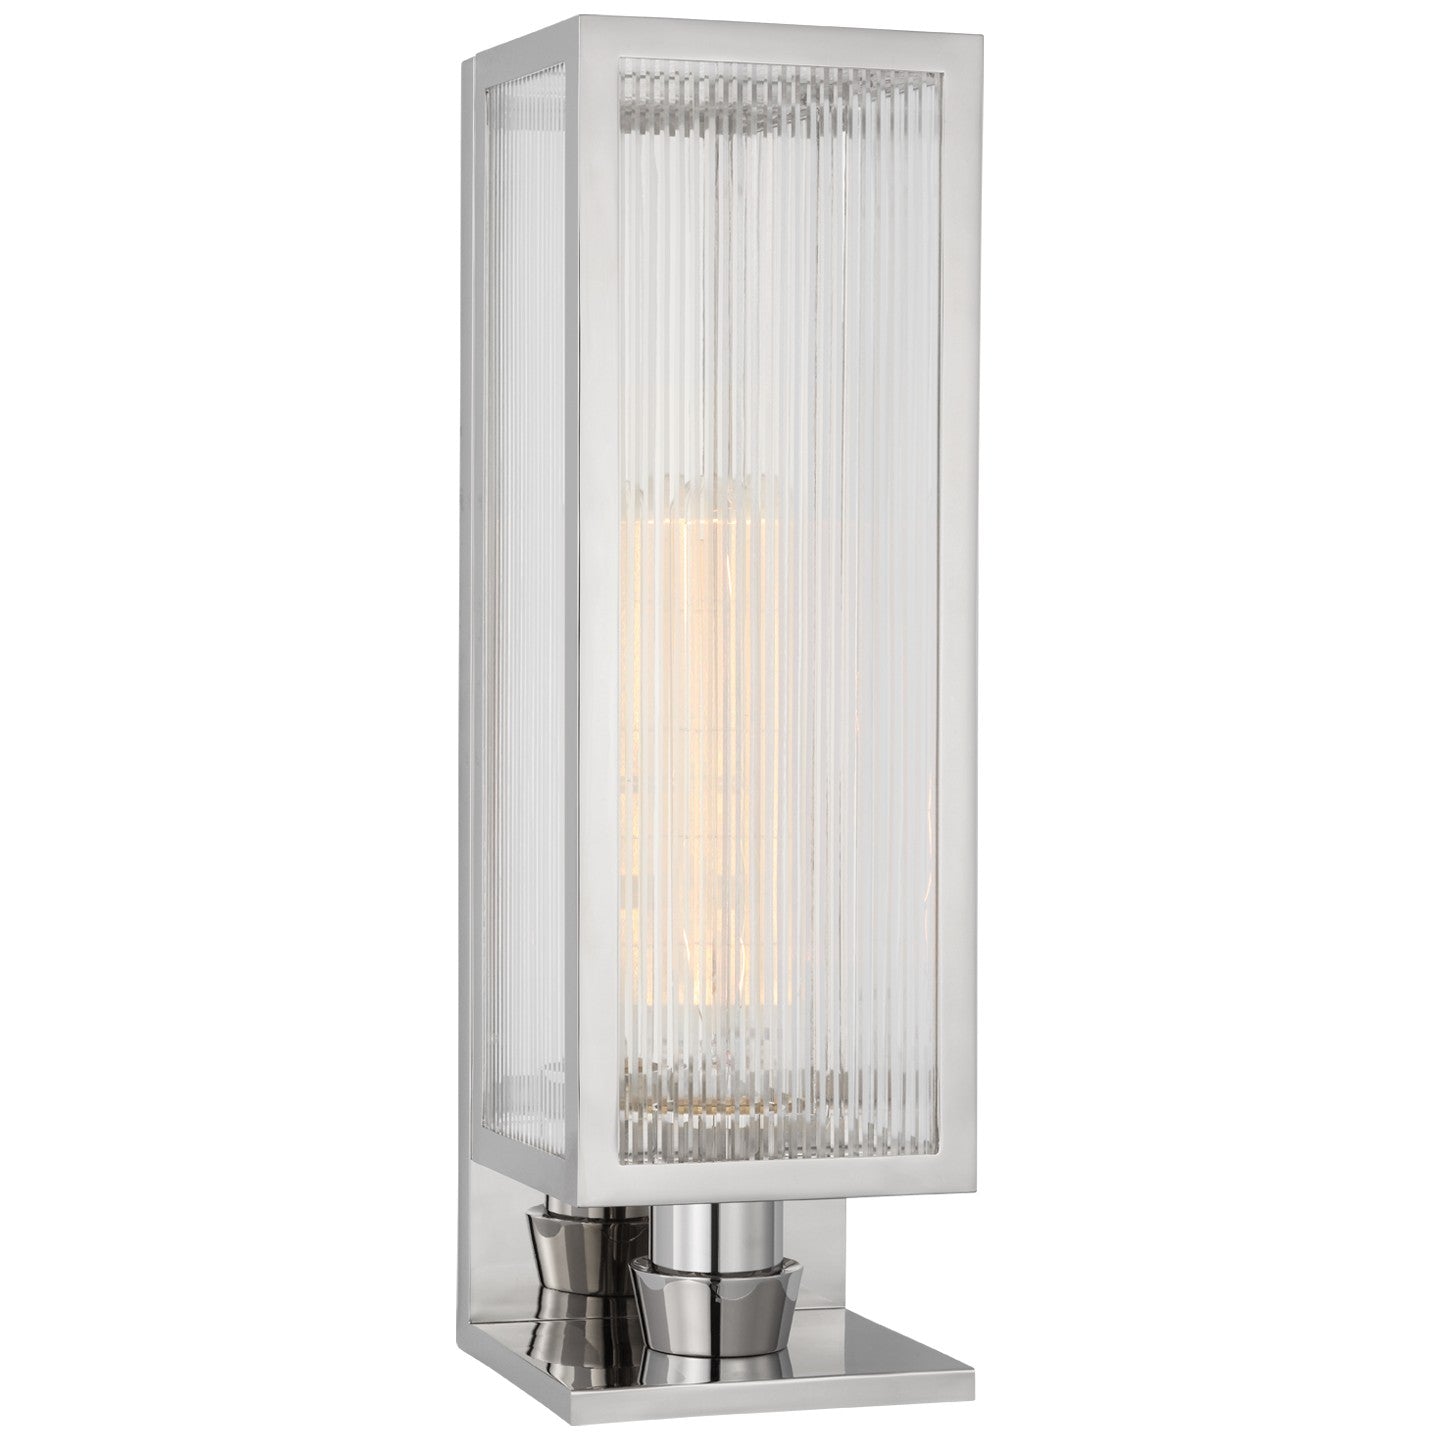 Visual Comfort Signature - BBL 2180PN-CRB - LED Wall Sconce - York - Polished Nickel